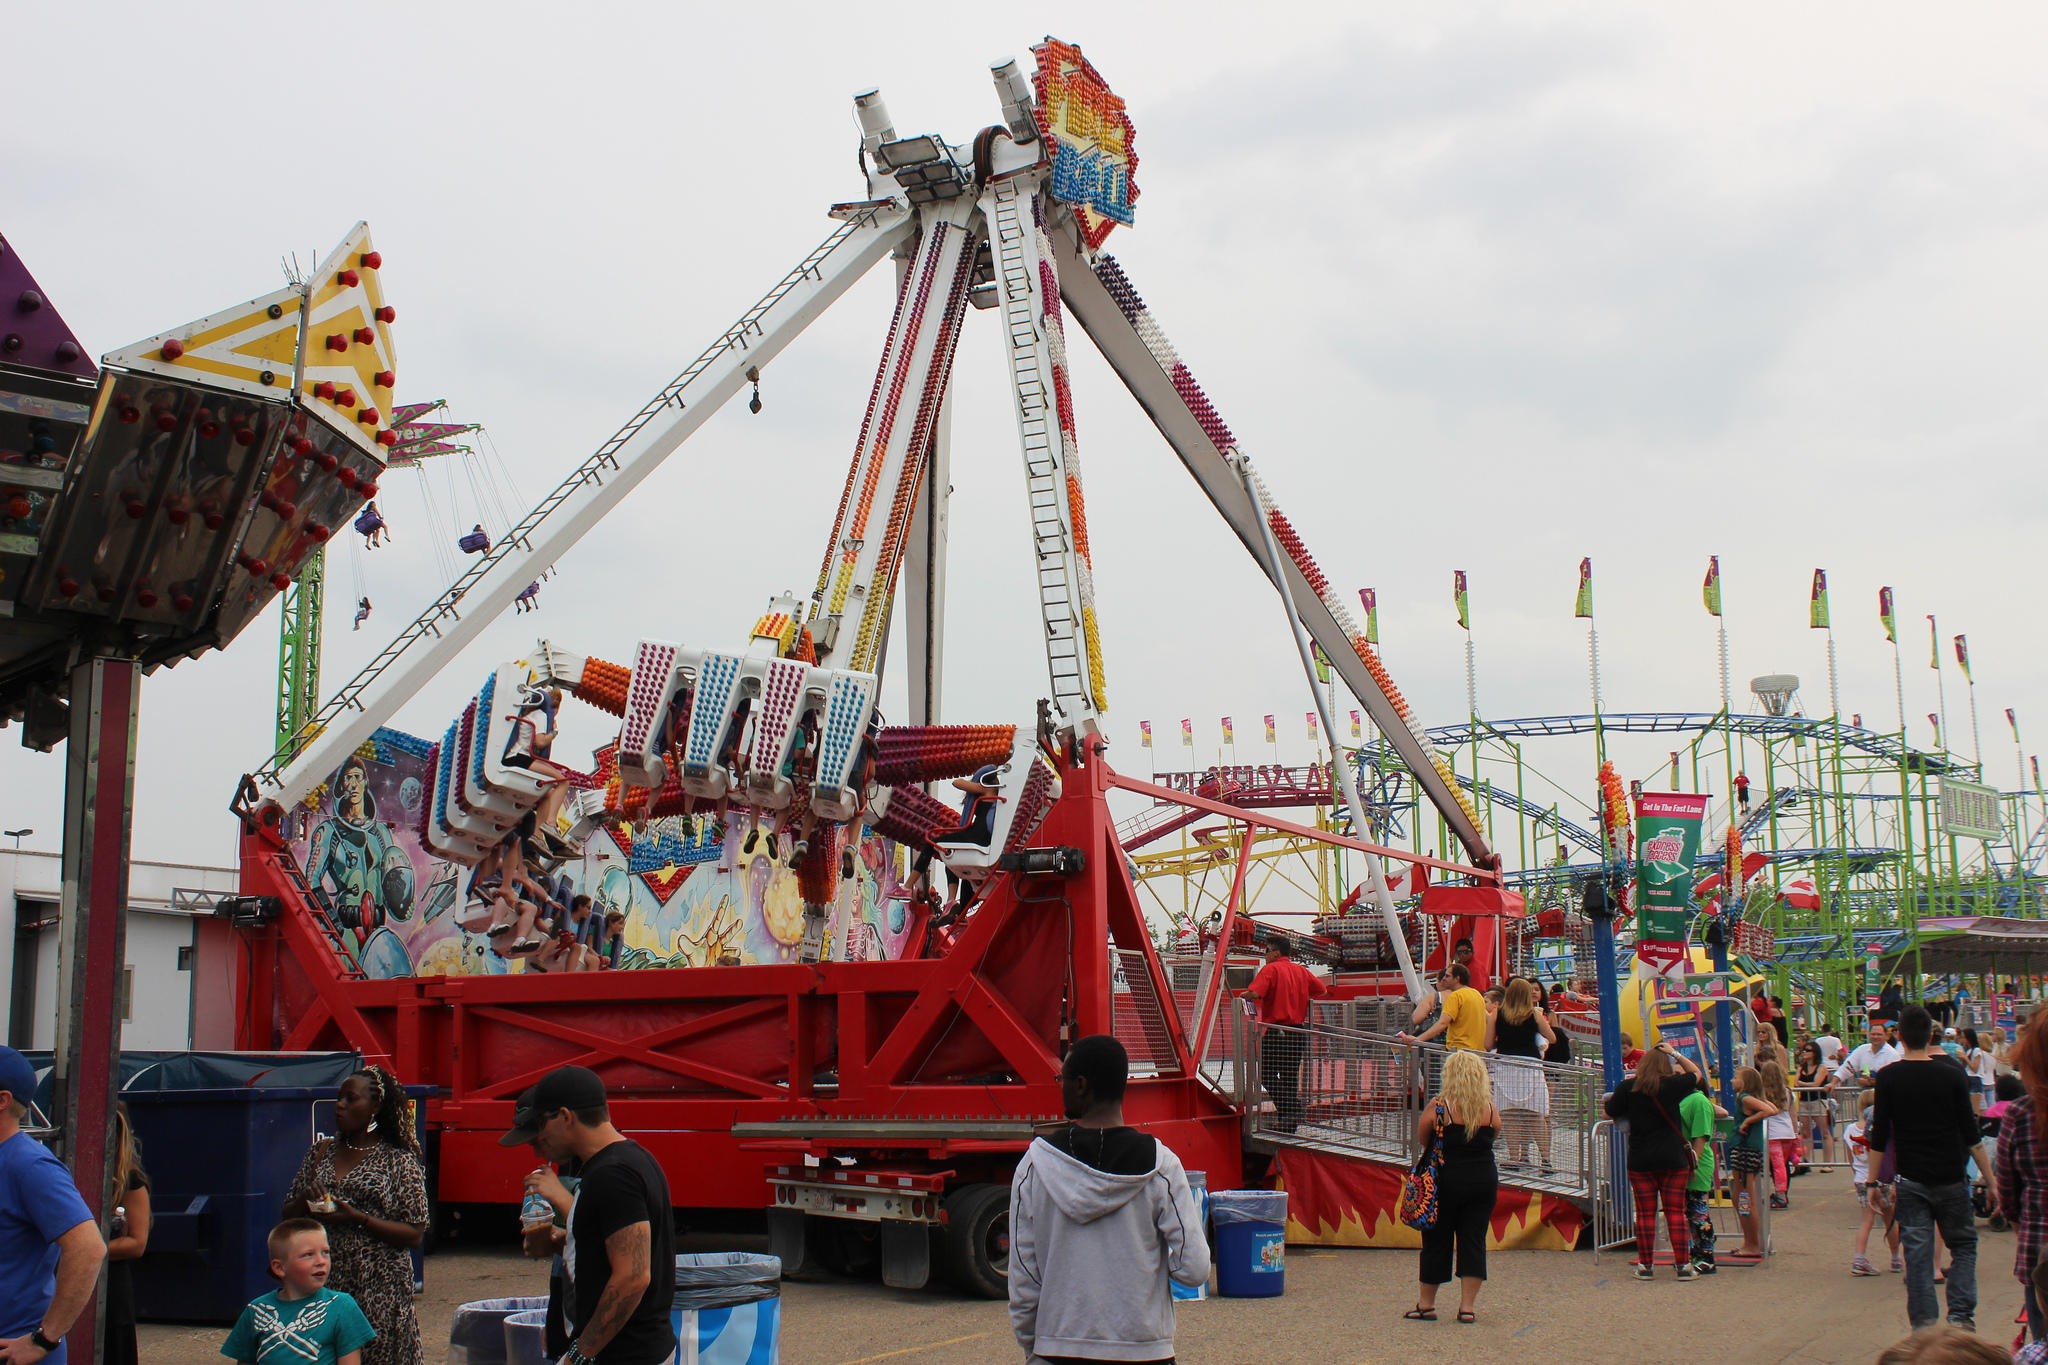 Fire Ball Manufacturer Blames Ohio State Fair Accident On "Excessive